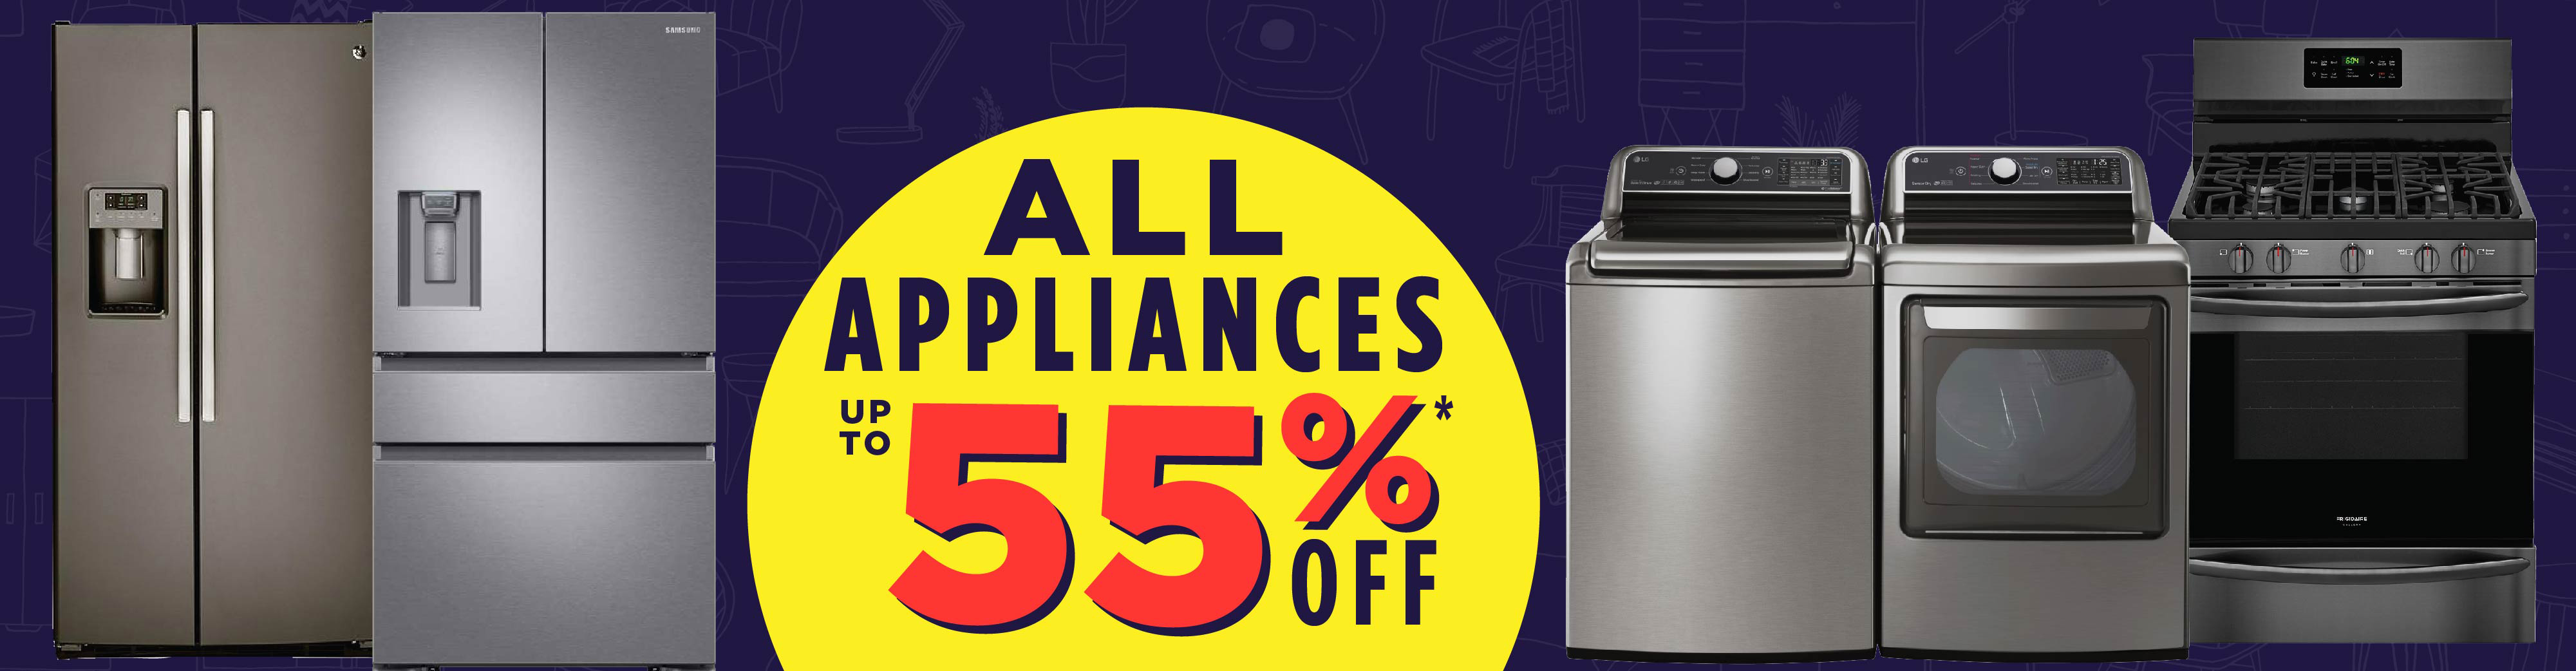 up to 55% Off Appliances